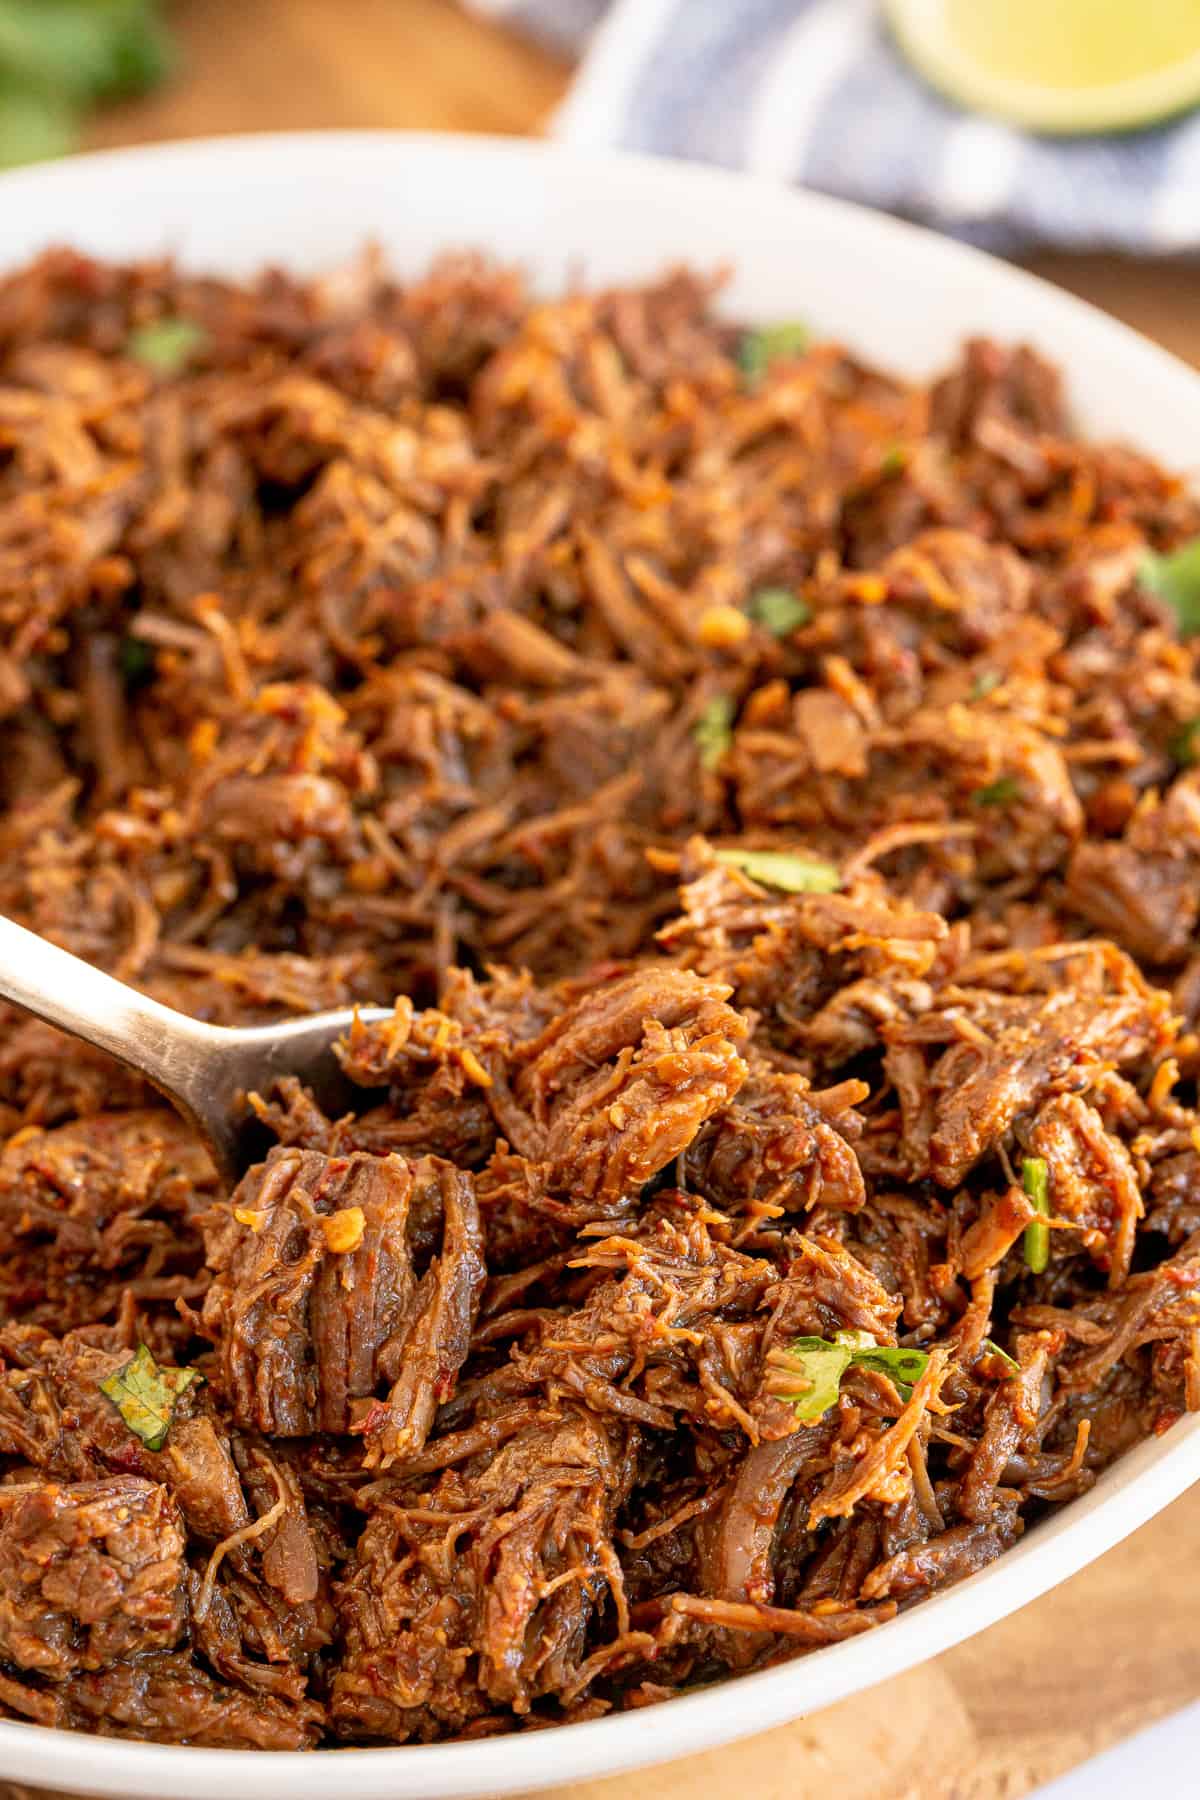 A fork digs into a mound of cooked, shredded beef barbacoa in a serving bowl.